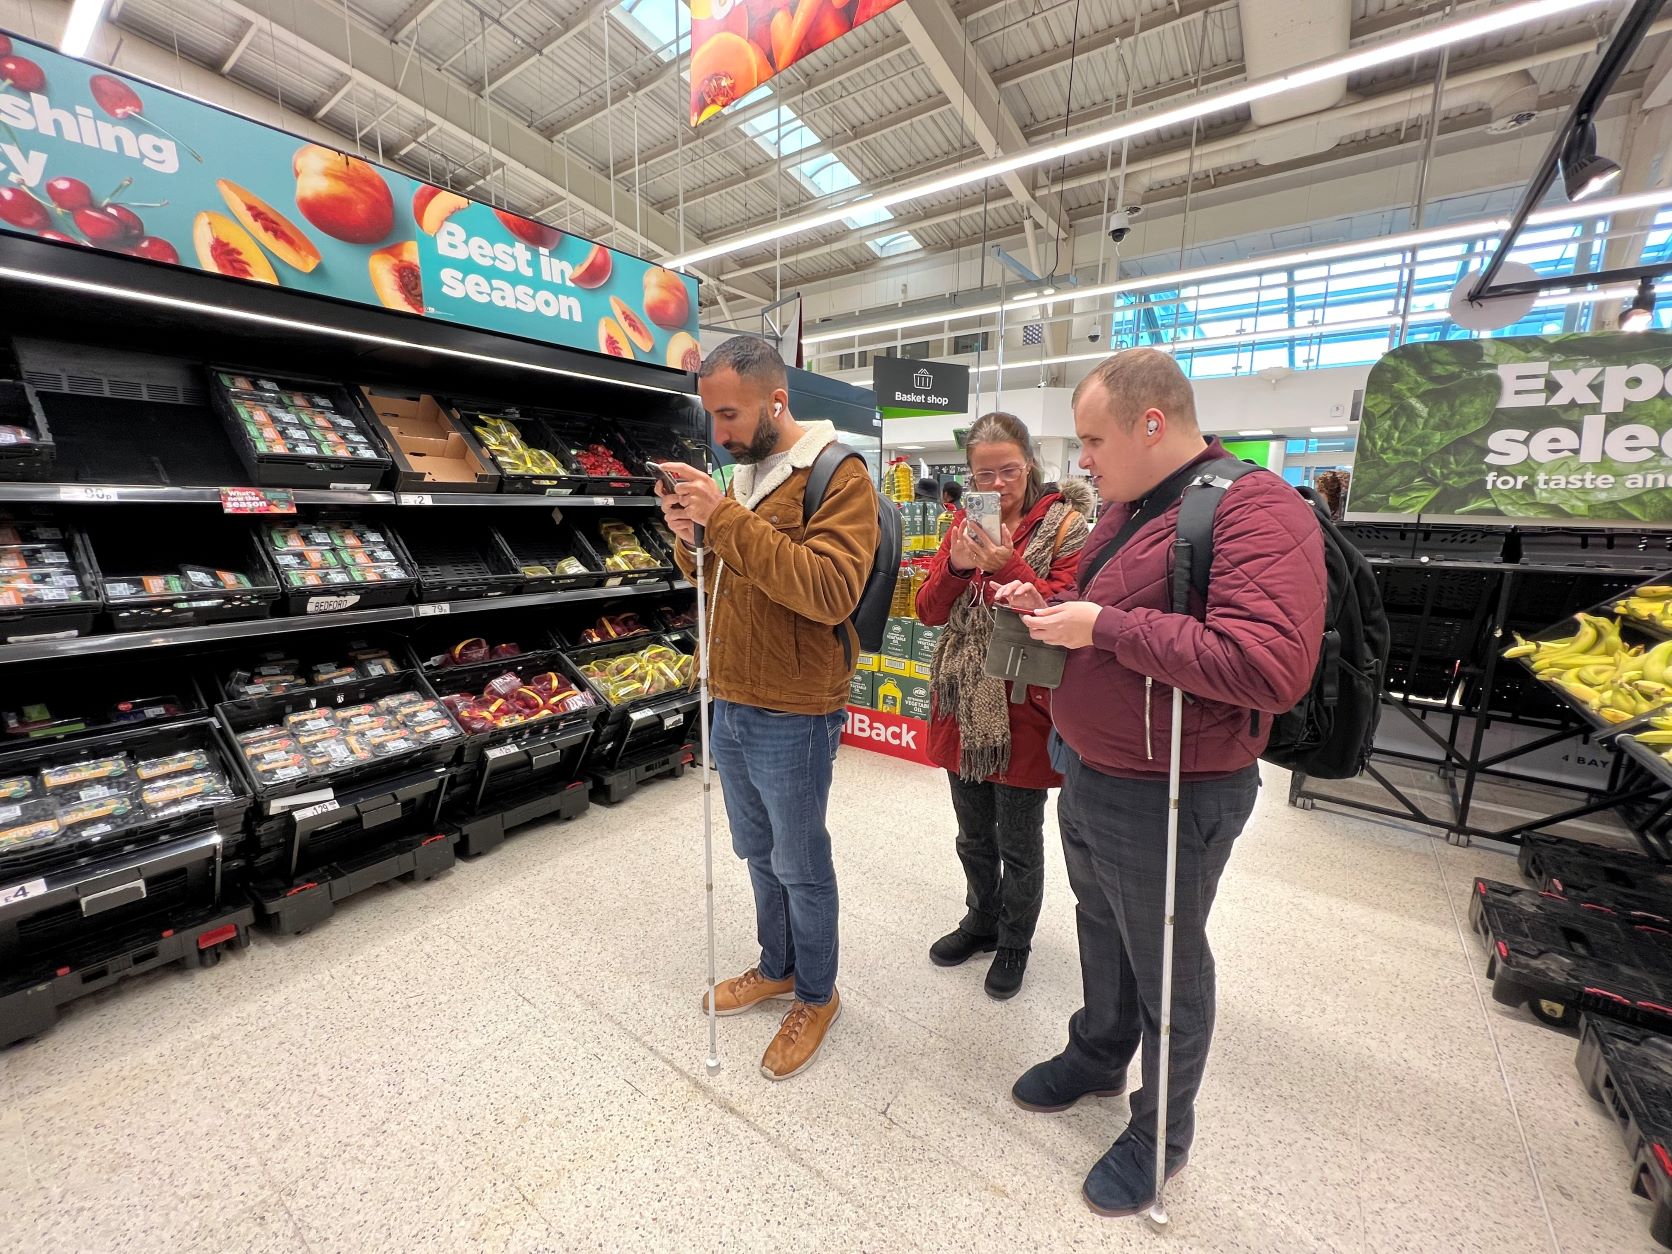 London SLC members are seen in the fruit aisle. They are all looking at their phones, using the GoodMaps navigation app.